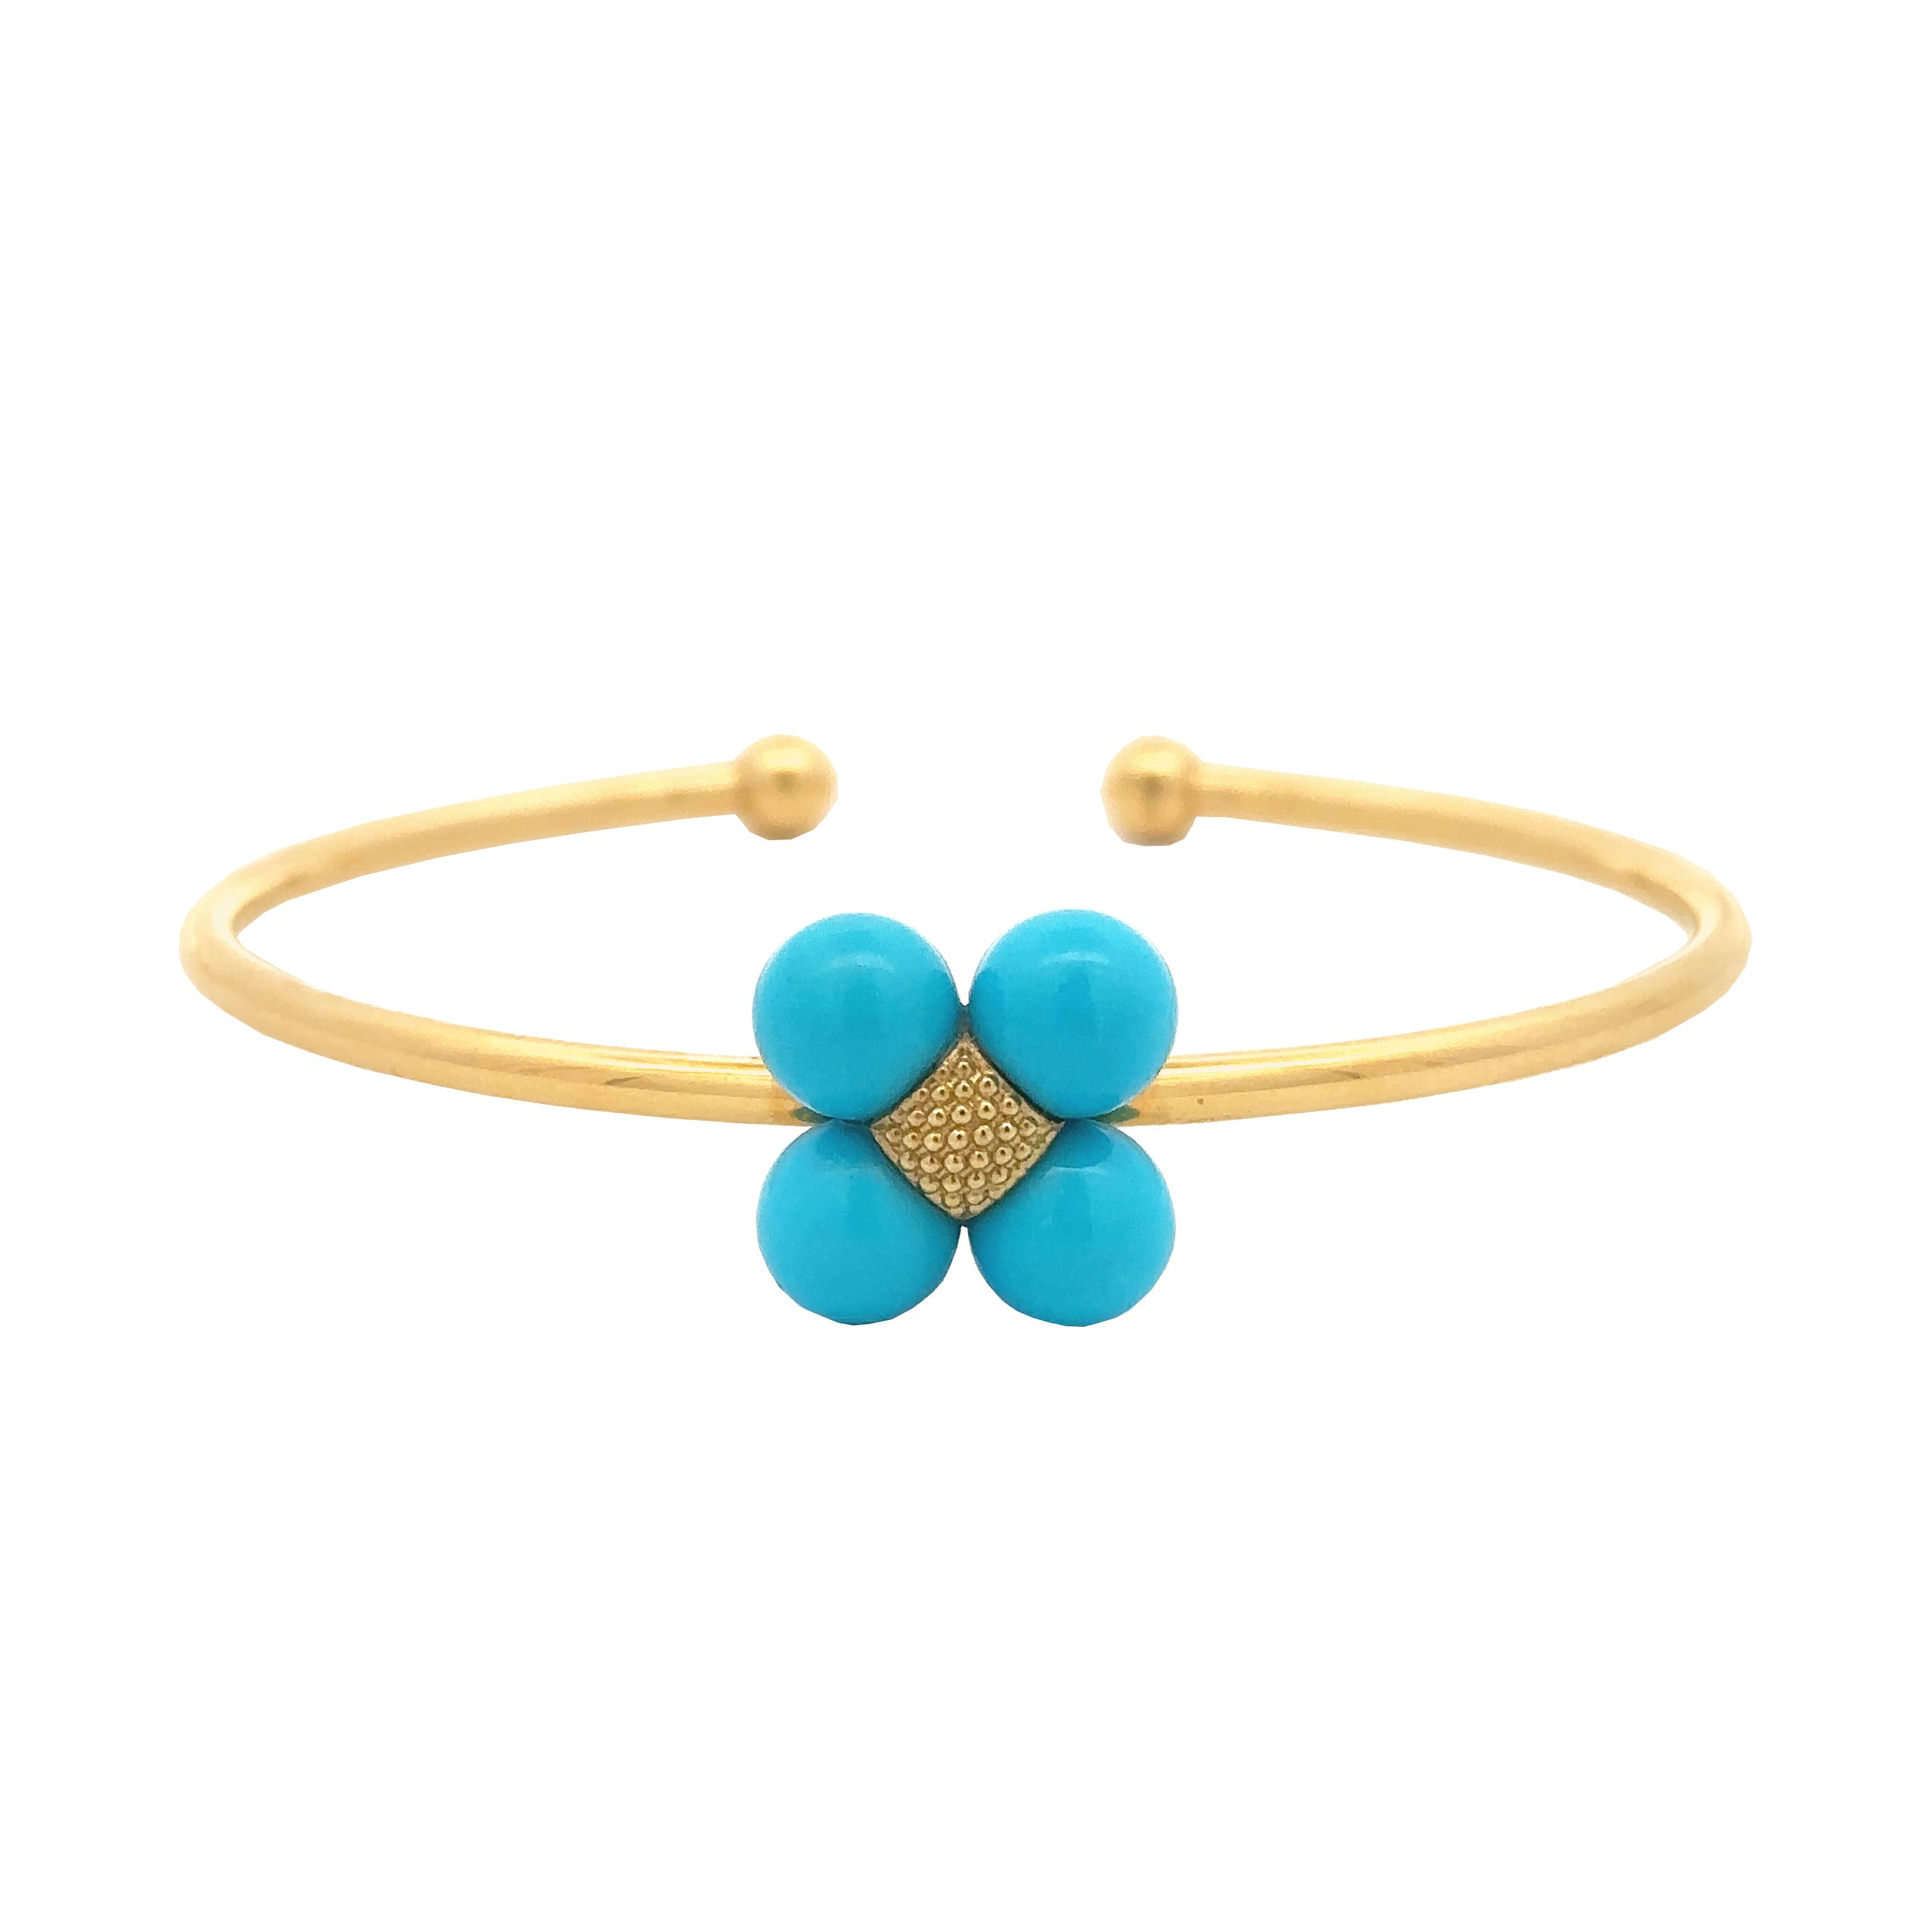 Paul Morelli Turquoise Sequence Bracelet - Be On Park